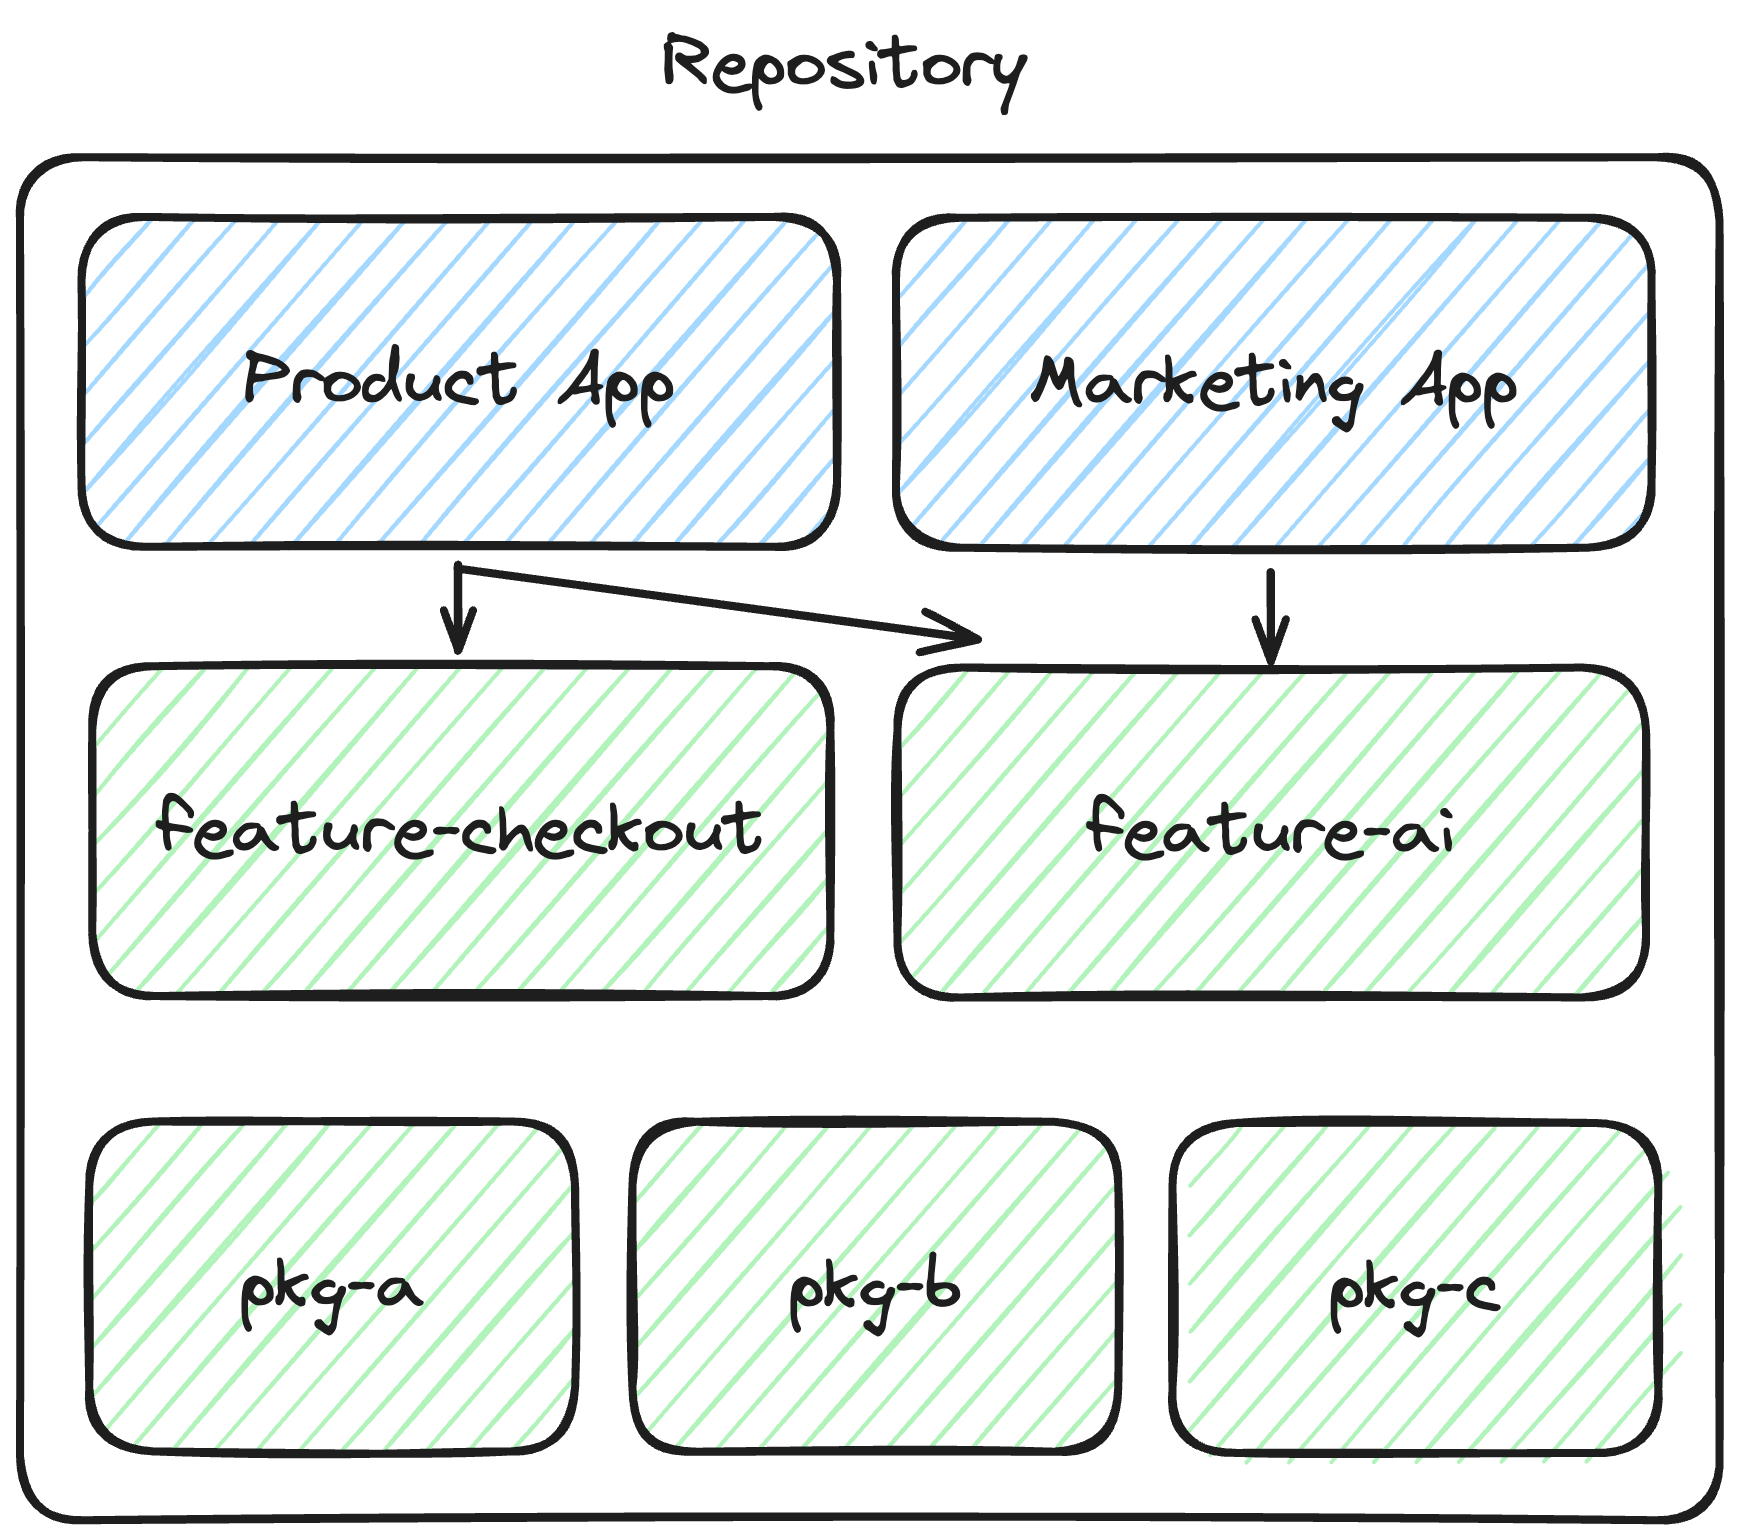 Easily reuse features across applications